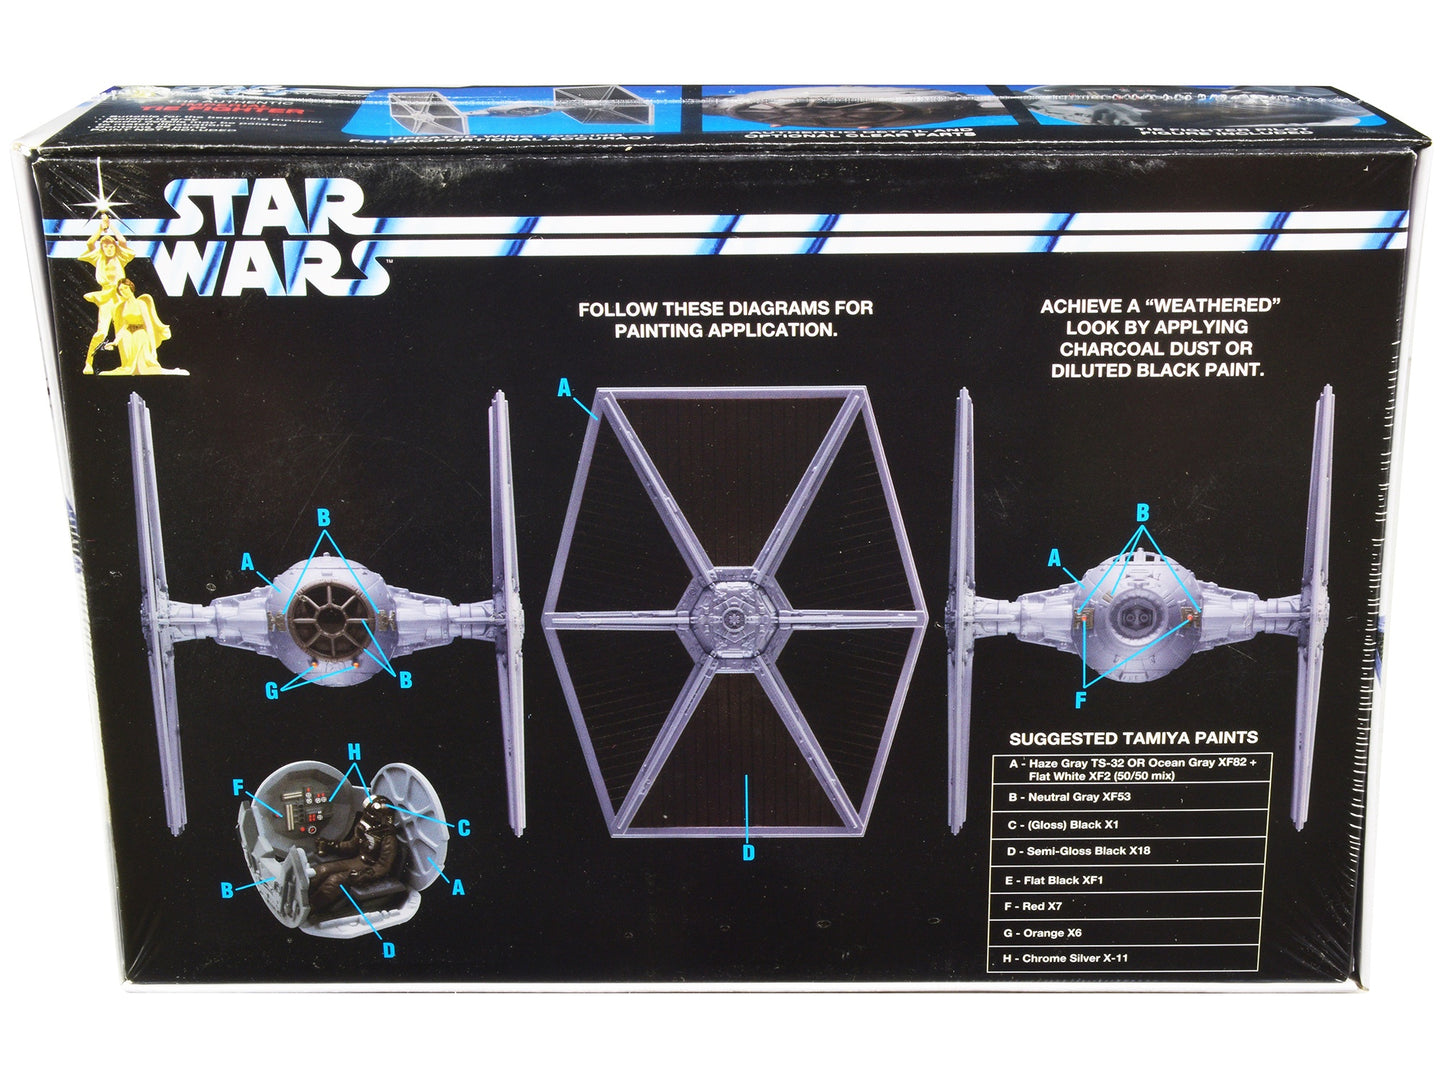 Skill 2 Model Kit Imperial Tie Fighter "Star Wars" (1977) Movie Model by AMT